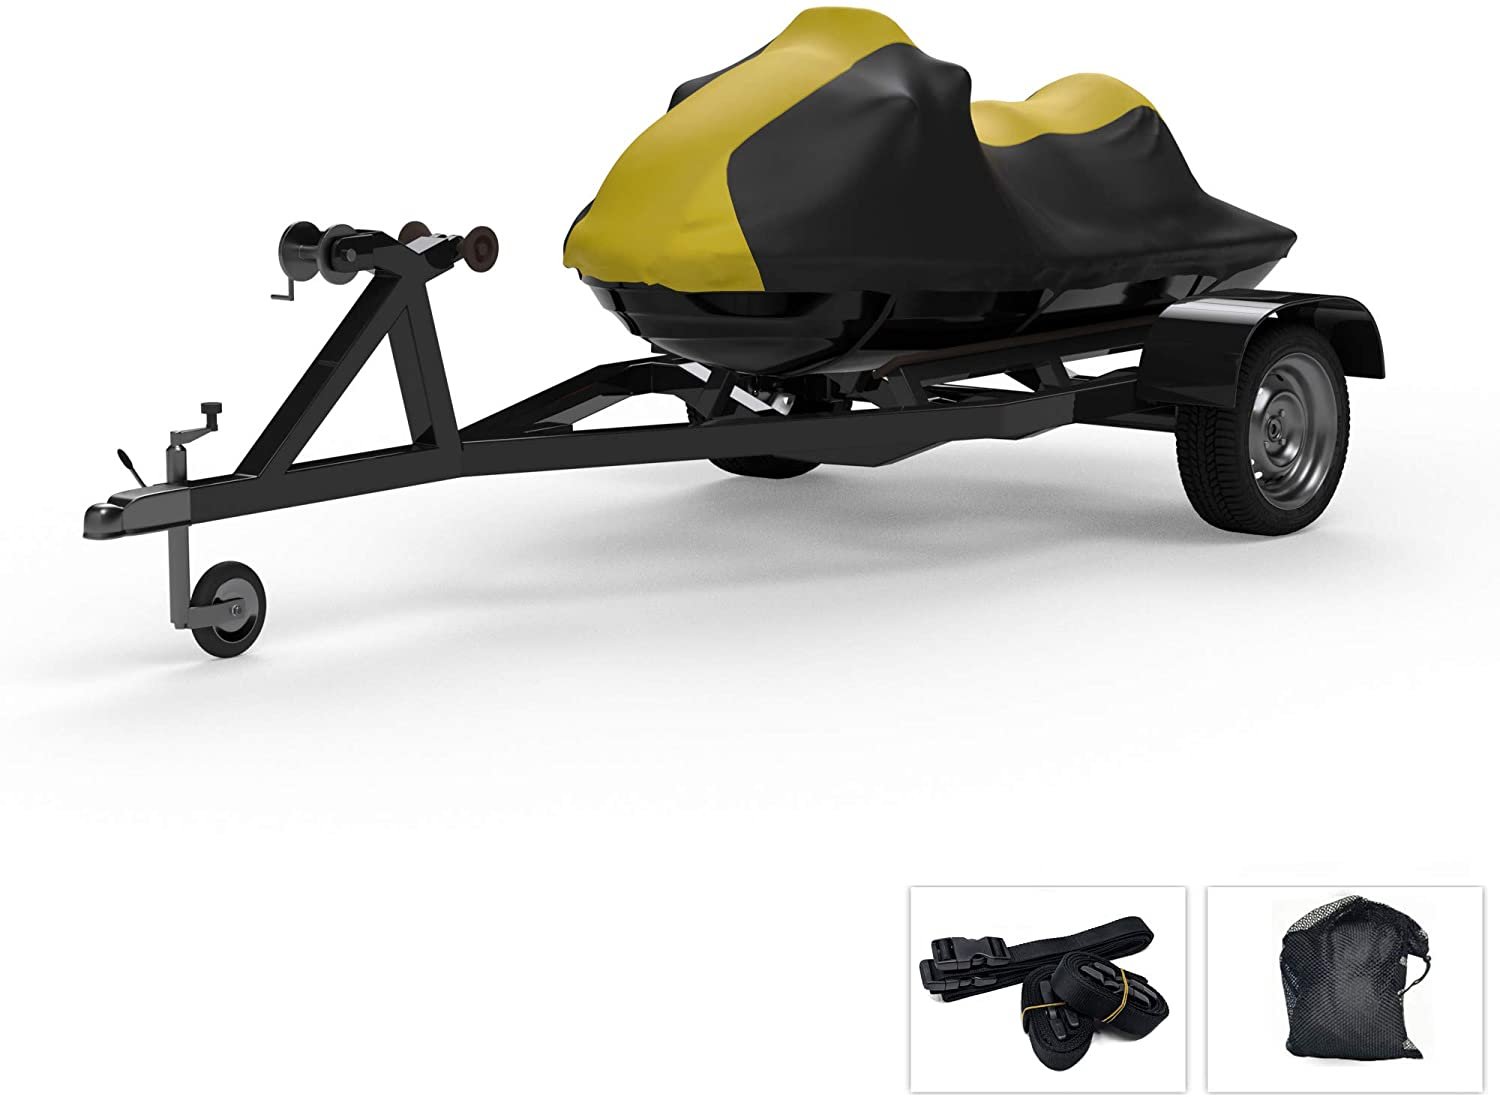 Weatherproof Jet Ski Covers for SEA DOO GTX 4-TEC Vans Triple Crown Edition 2003-2003 - Yellow/Black - All Weather - Trailerable - Protects from Rain, Sun! Free Trailer Straps & Storage Bag - image 1 of 7